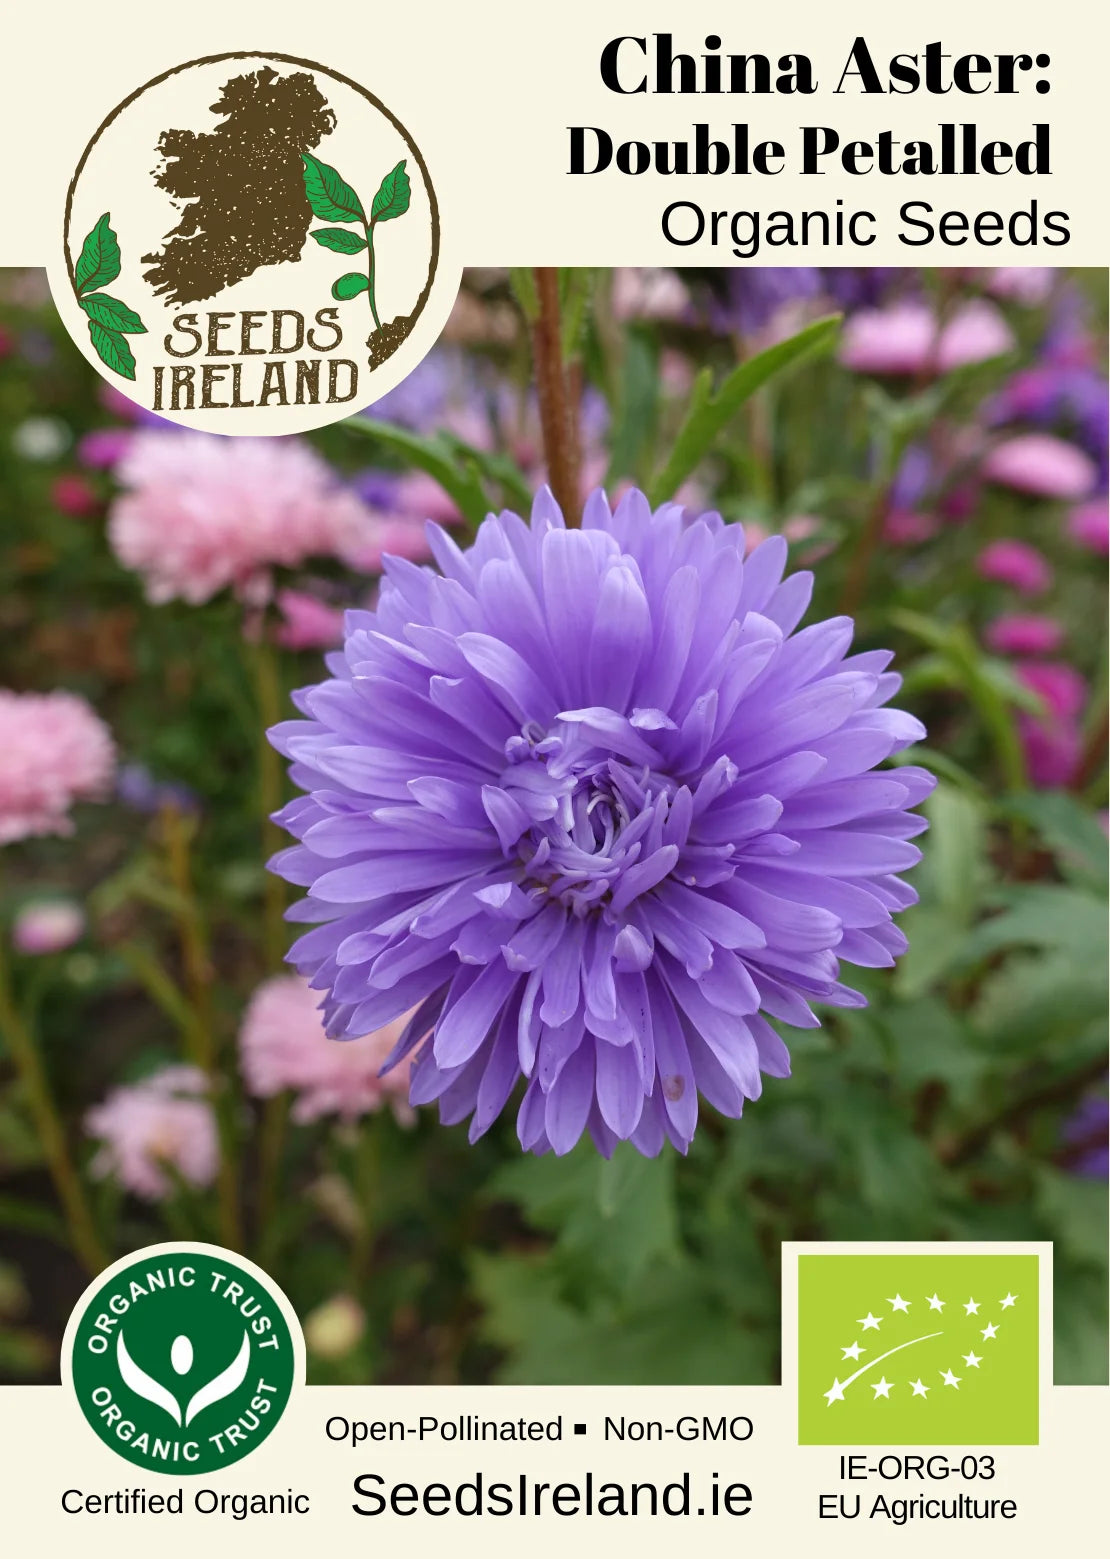 China Aster: Double Petalled Organic Seed